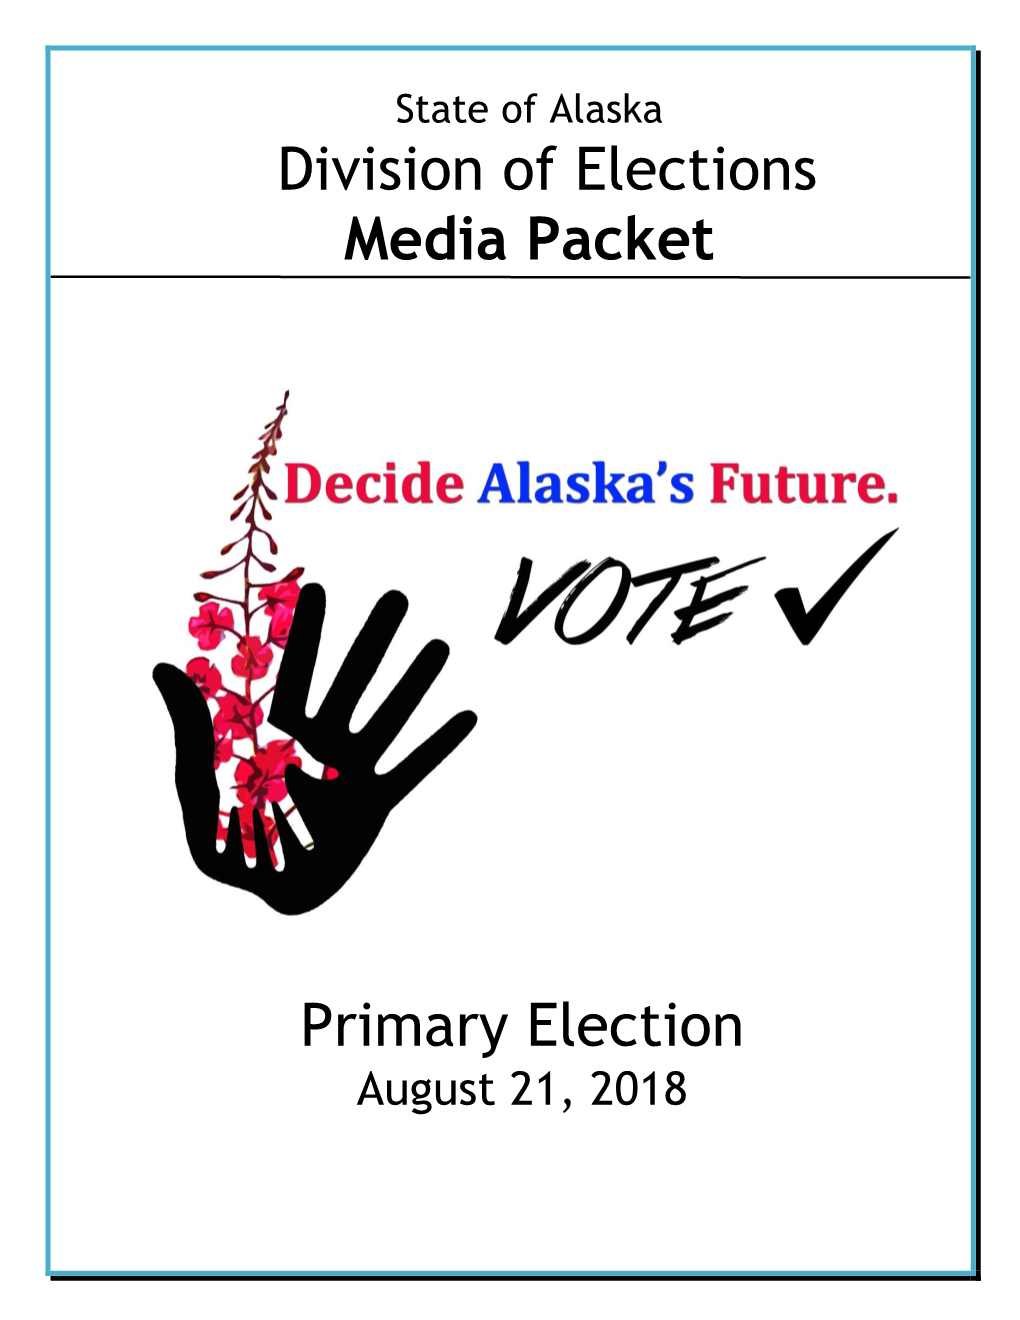 2018 Primary Election Media Packet